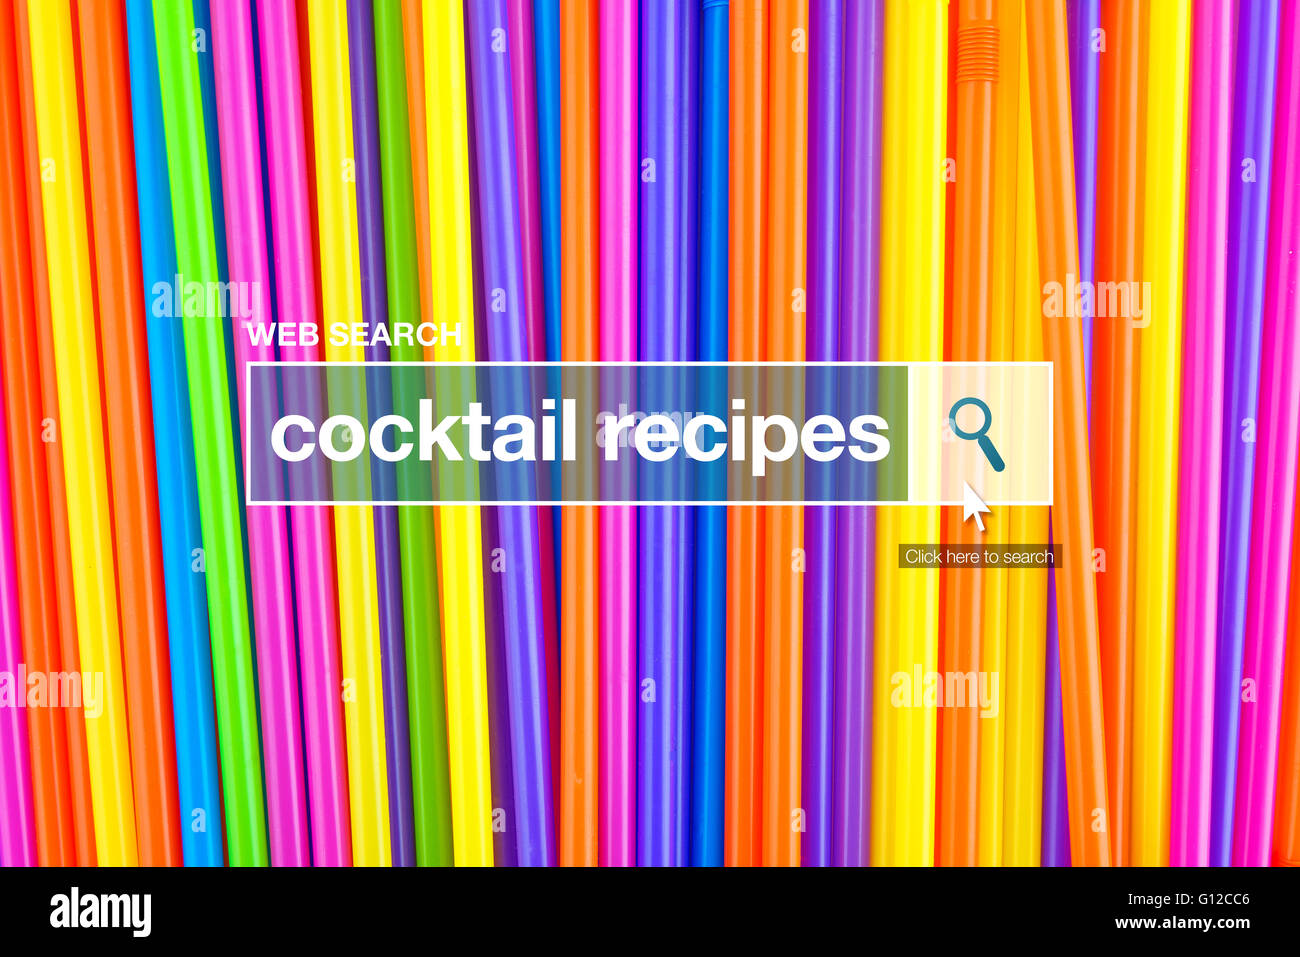 Cocktail recipes definition in internet glossary- web search bar glossary term Stock Photo